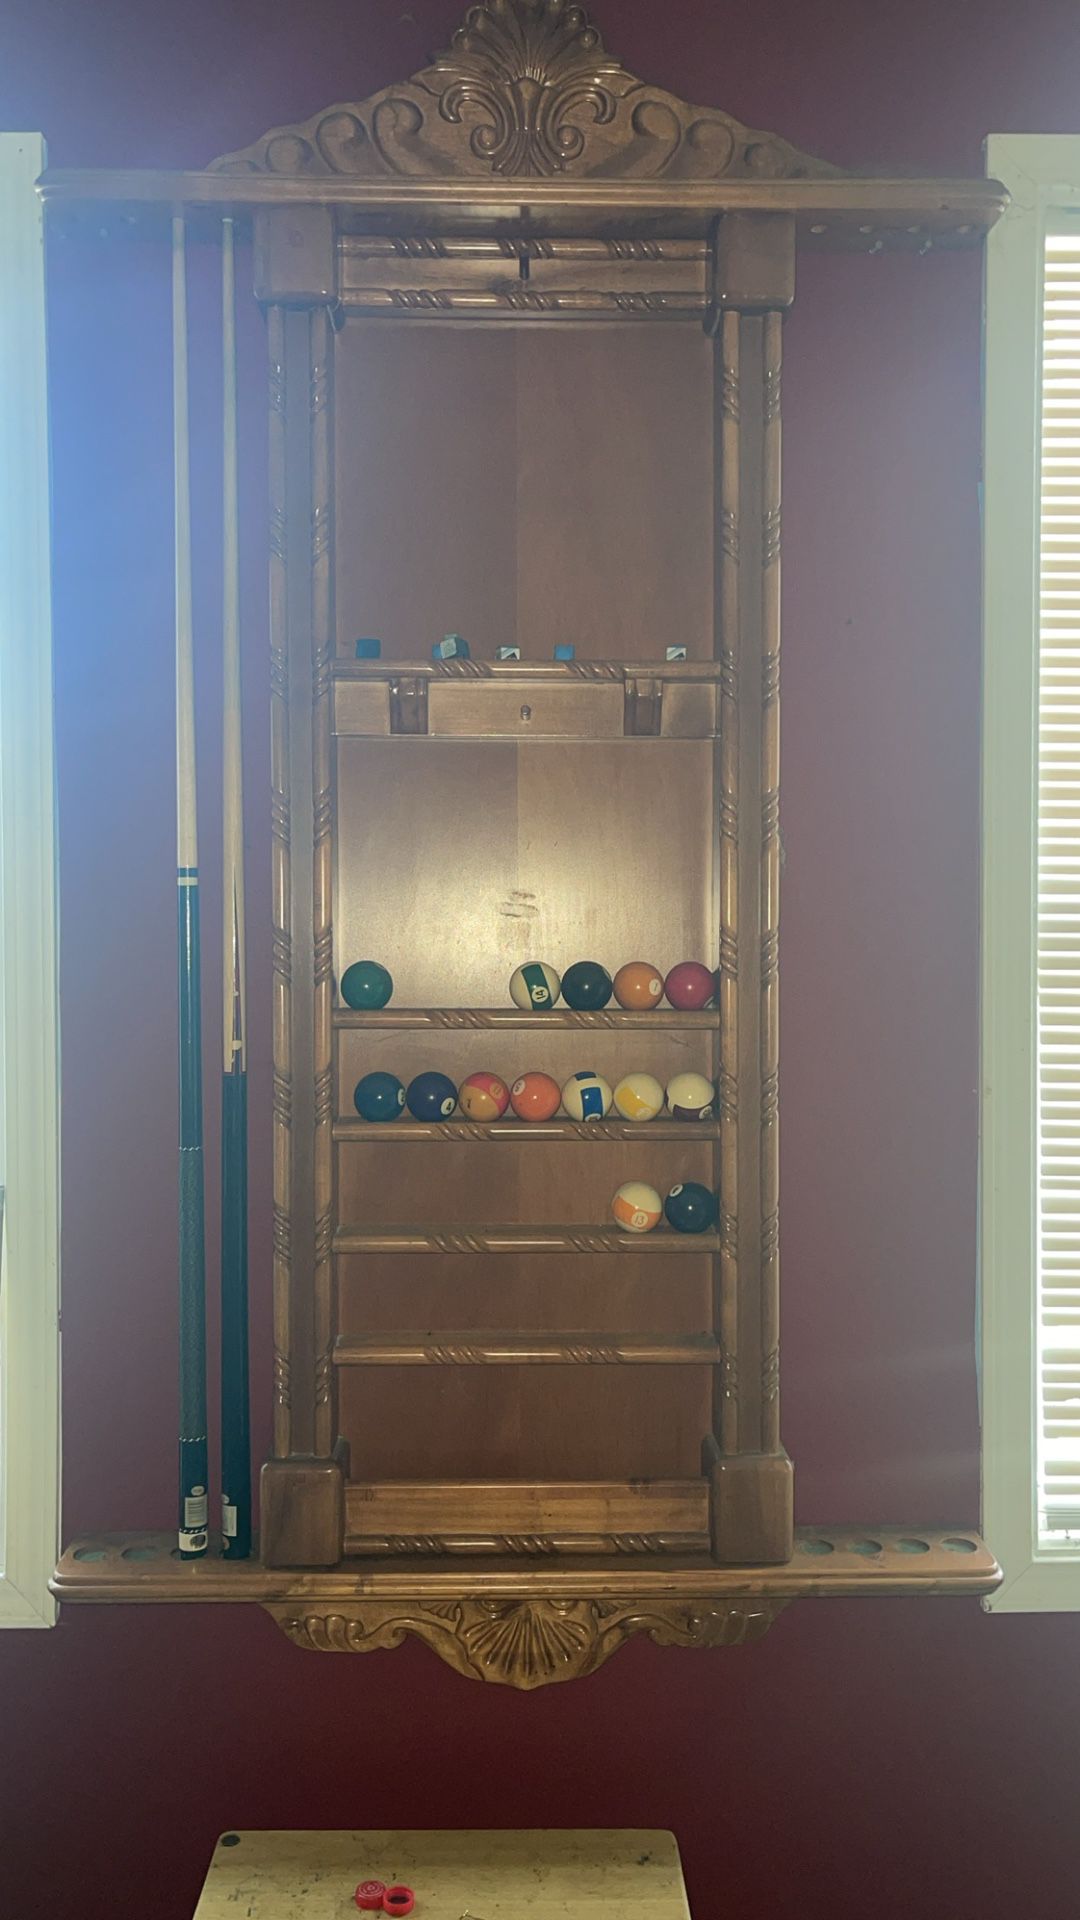 Wooden wall poolstick holder